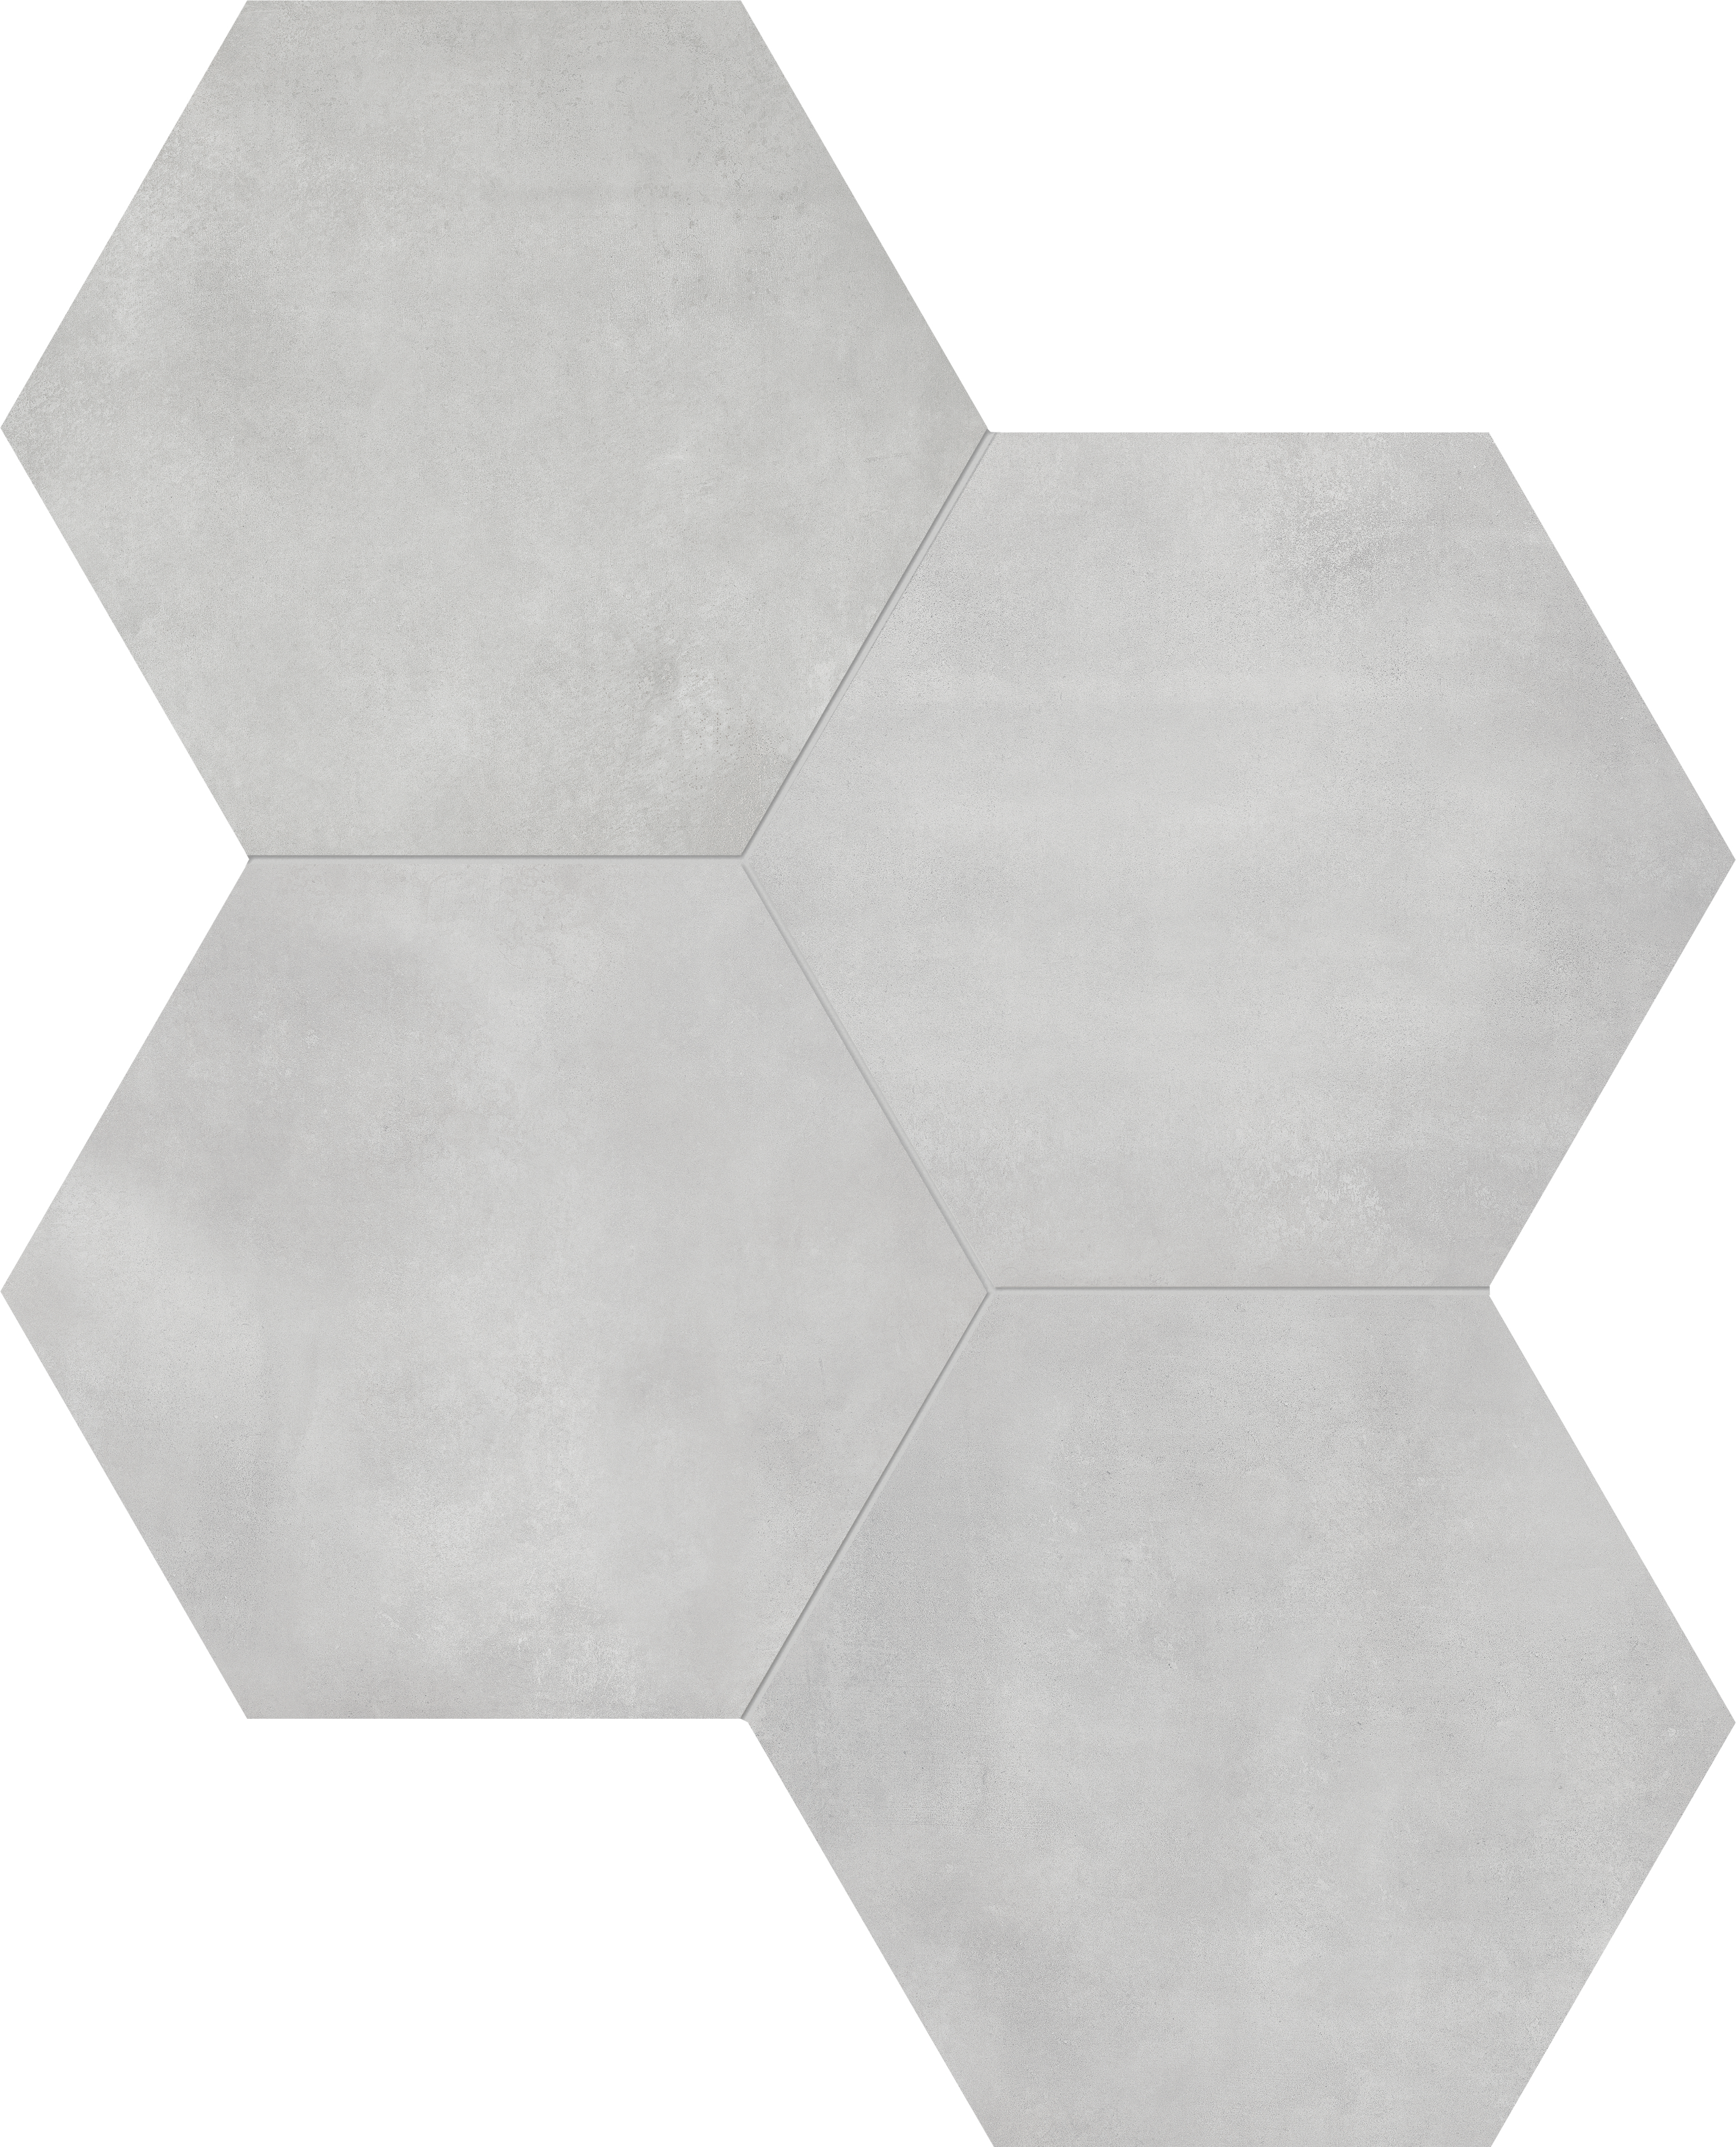 ice pattern glazed porcelain field tile from form anatolia collection distributed by surface group international matte finish pressed edge 7-inch hexagon shape